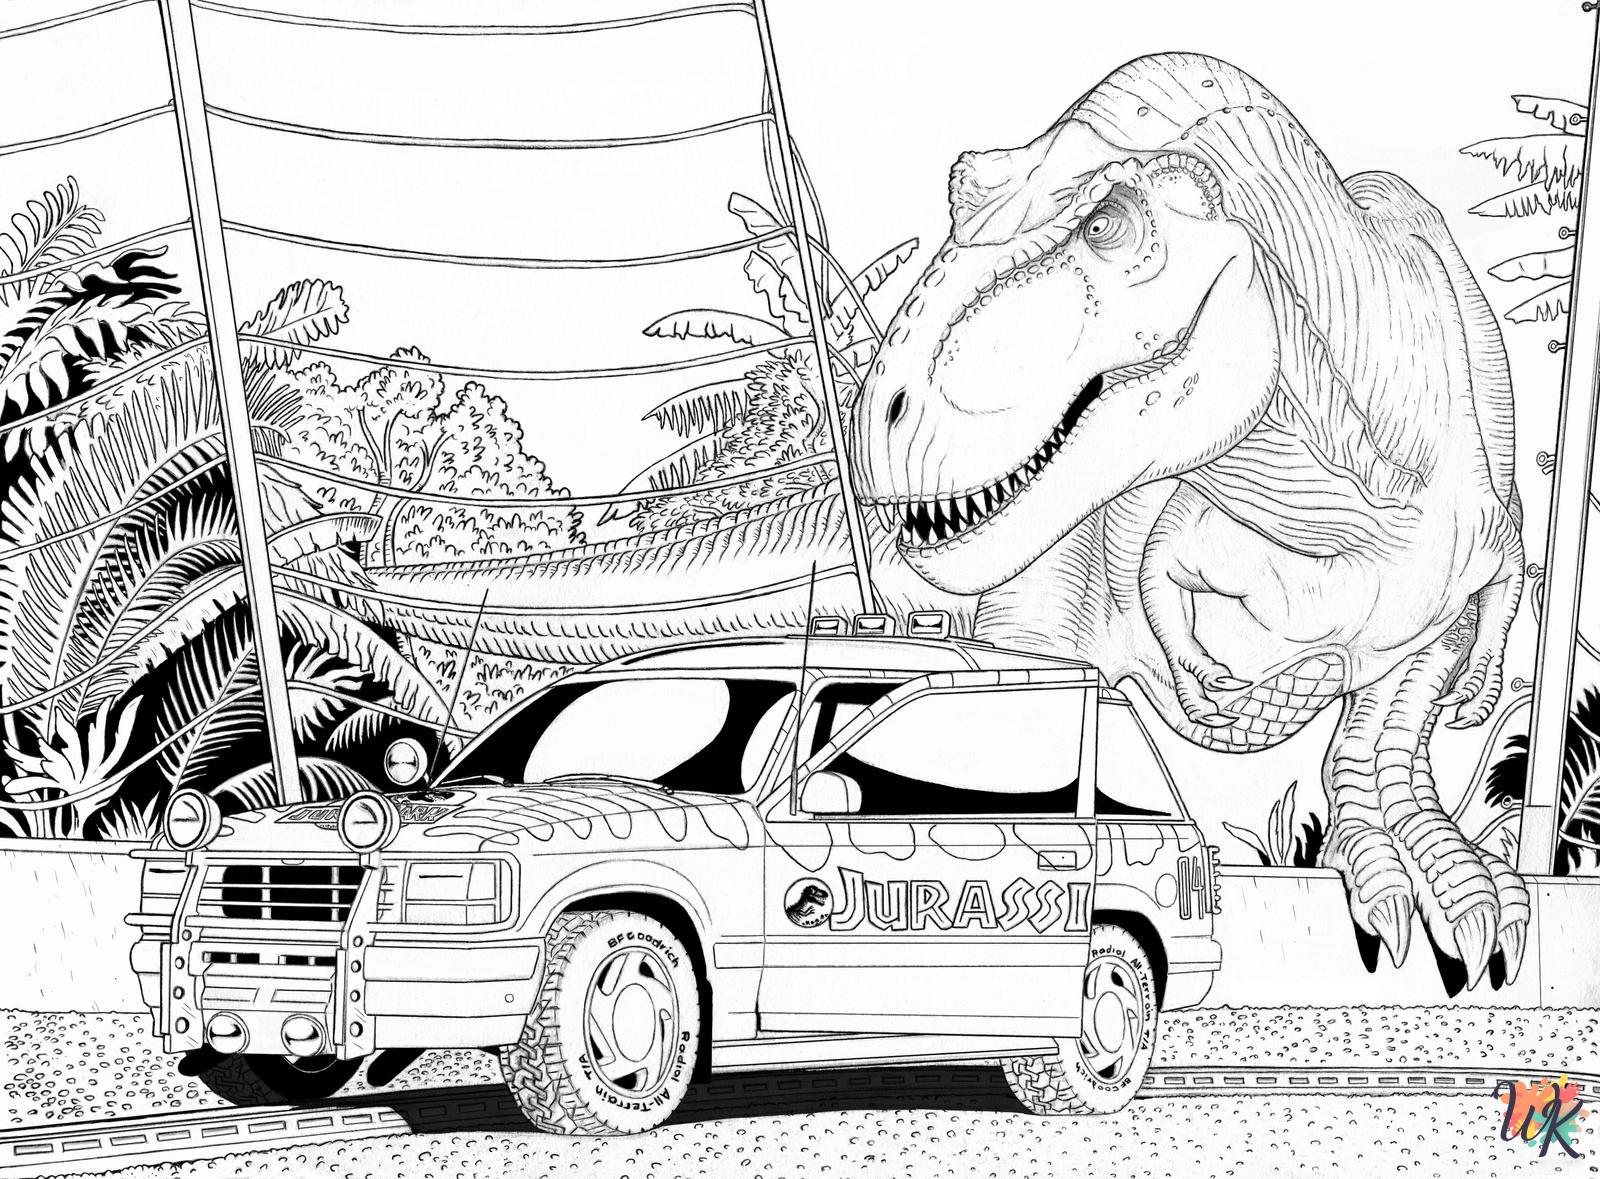 merry Jurassic Park coloring pages